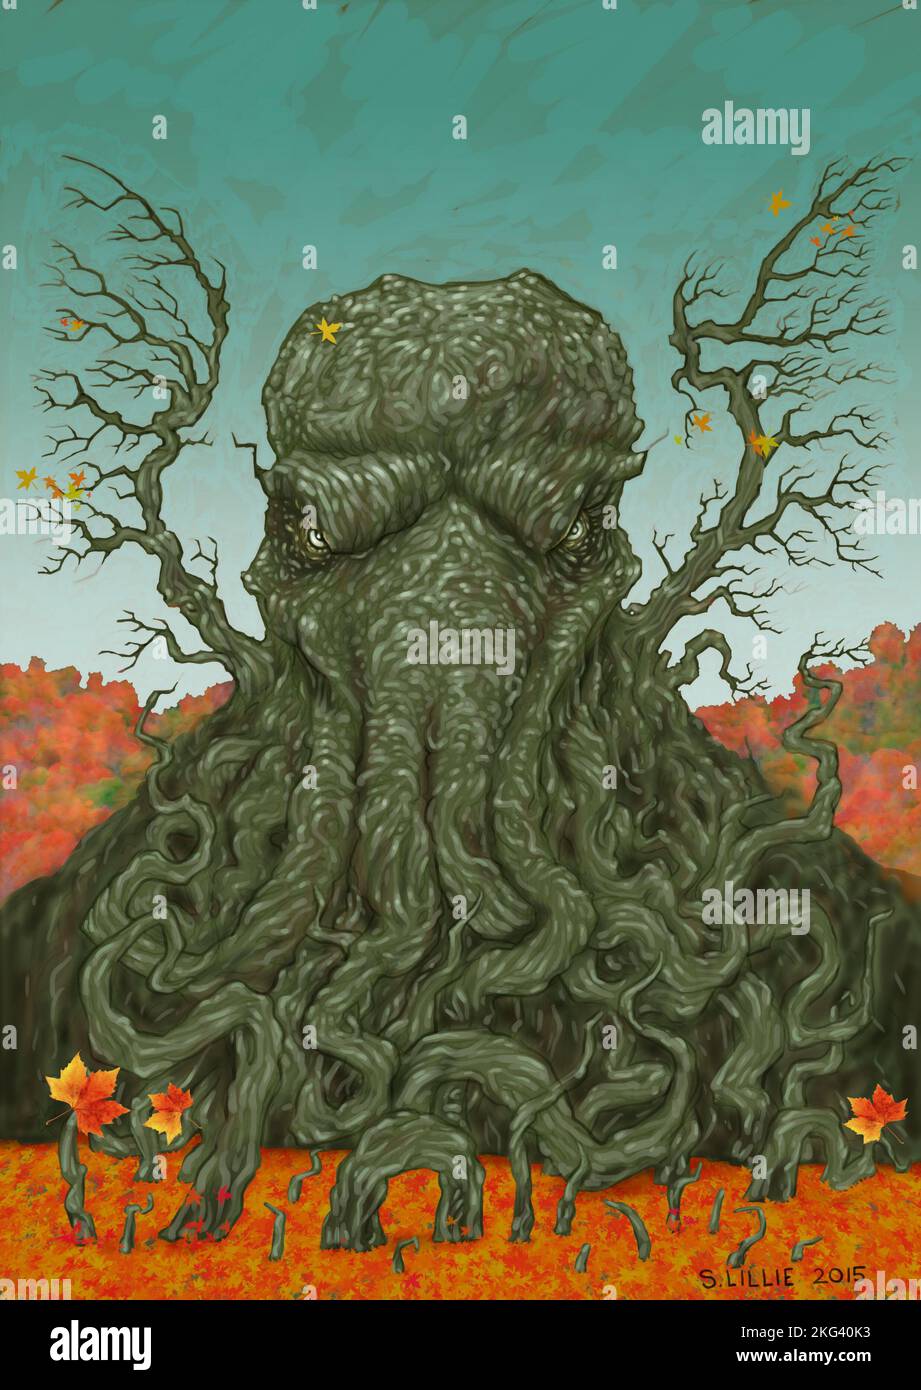 Horror art illustrating, Cthulhu, a fictional cosmic entity created by H. P. Lovecraft in his story The Call of Cthulhu. Considered a Great Old One. Stock Photo